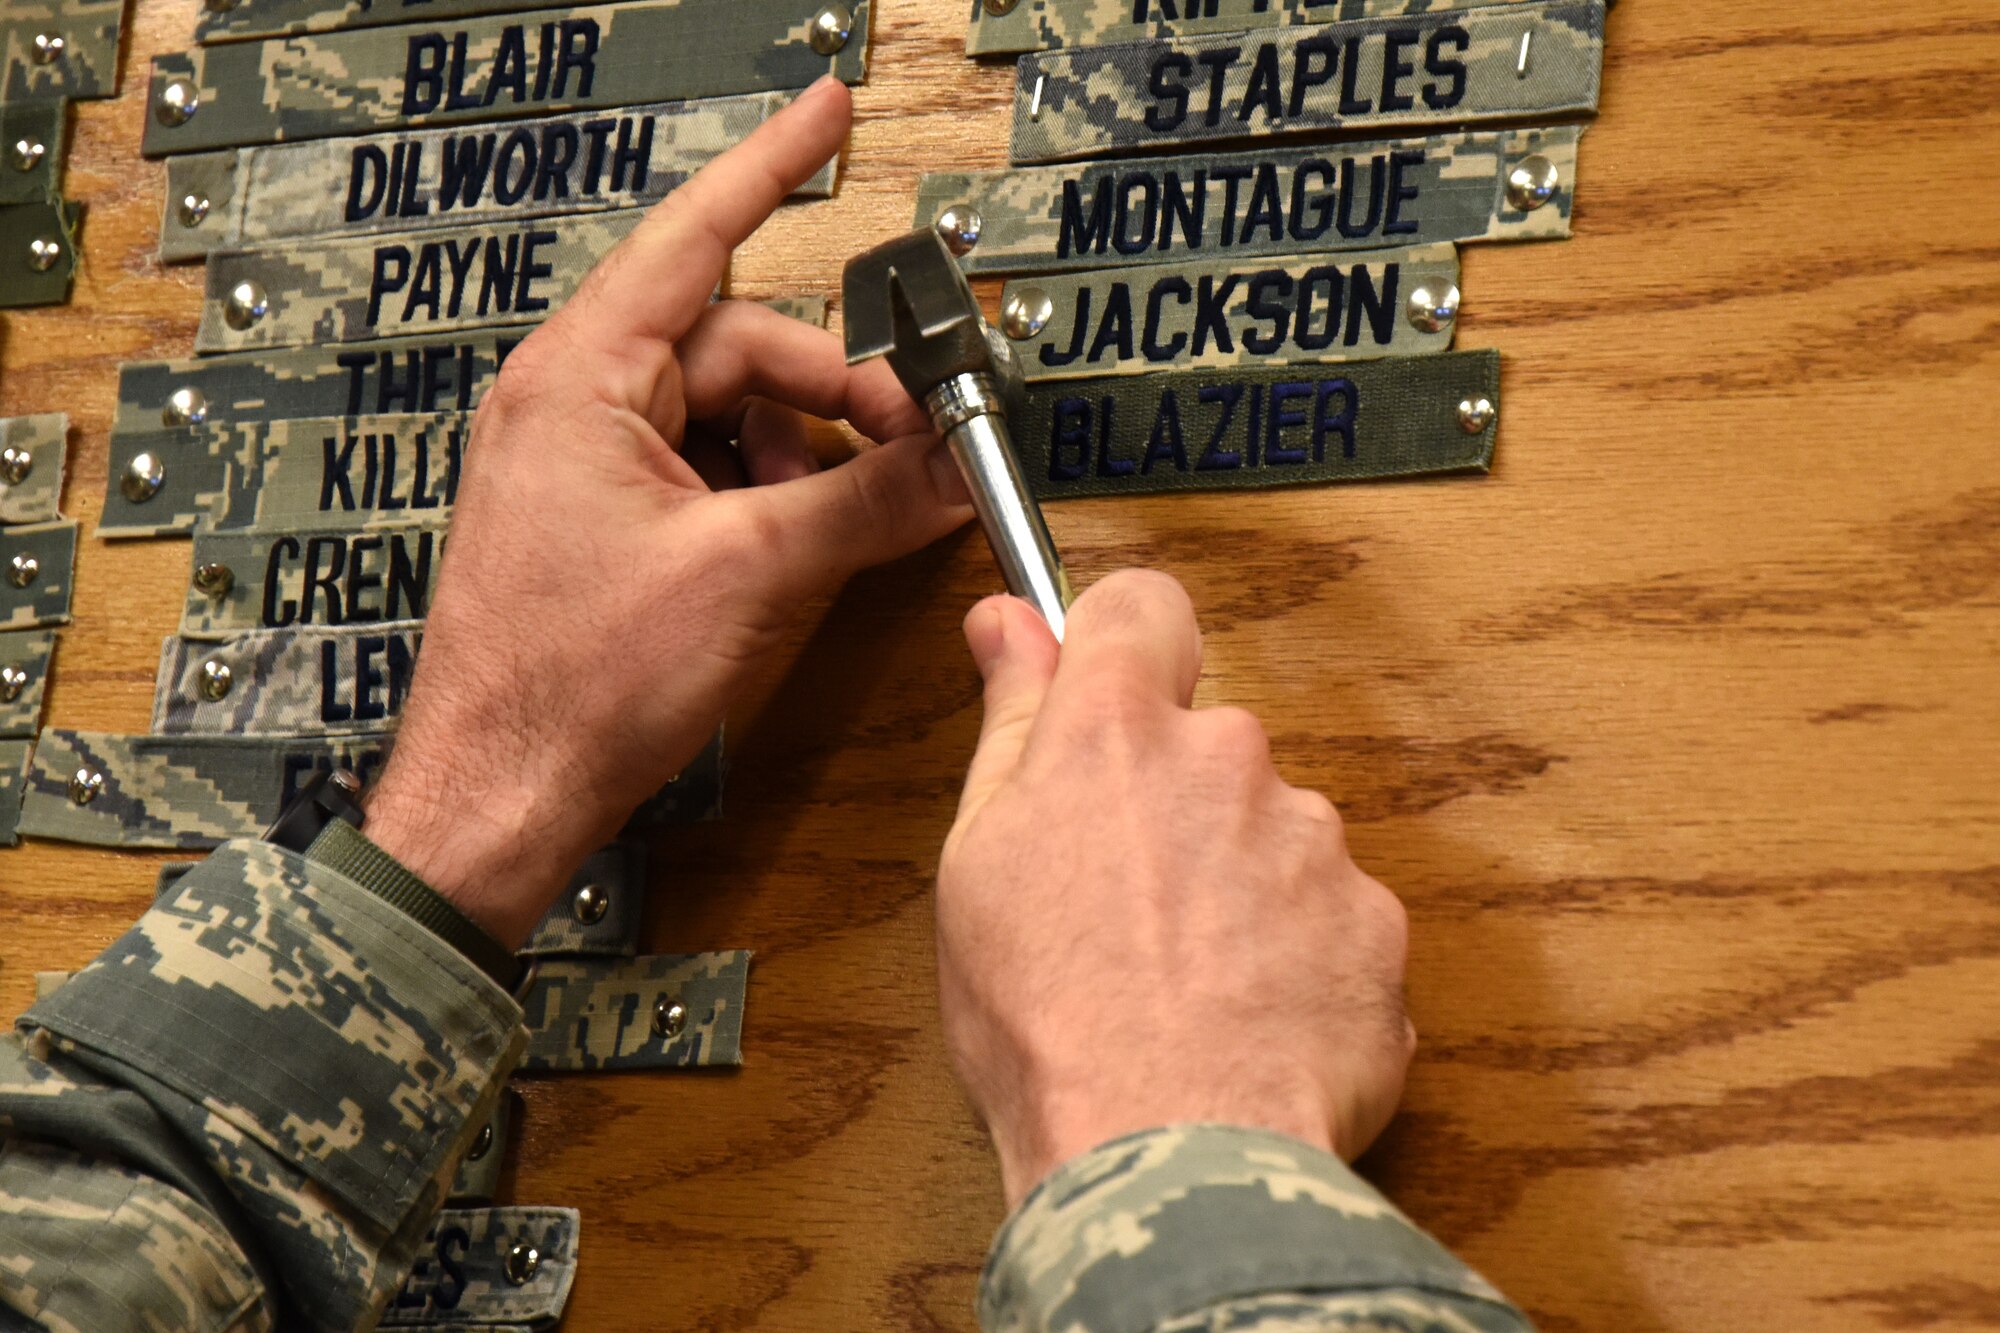 U.S. Air Force Chief Master Sgt. Stefan Blazier, 363rd Intelligence, Surveillance and Reconnaissance Wing command chief, tacks his name tape to the instructor wall in the Heritage Hall of the 315th Training Squadron on Goodfellow Air Force Base, Texas, July 26, 2018. This hall is used to honor instructors who have taught at the squadron over the years. (U.S. Air Force photo by Airman 1st Class Seraiah Hines/Released)